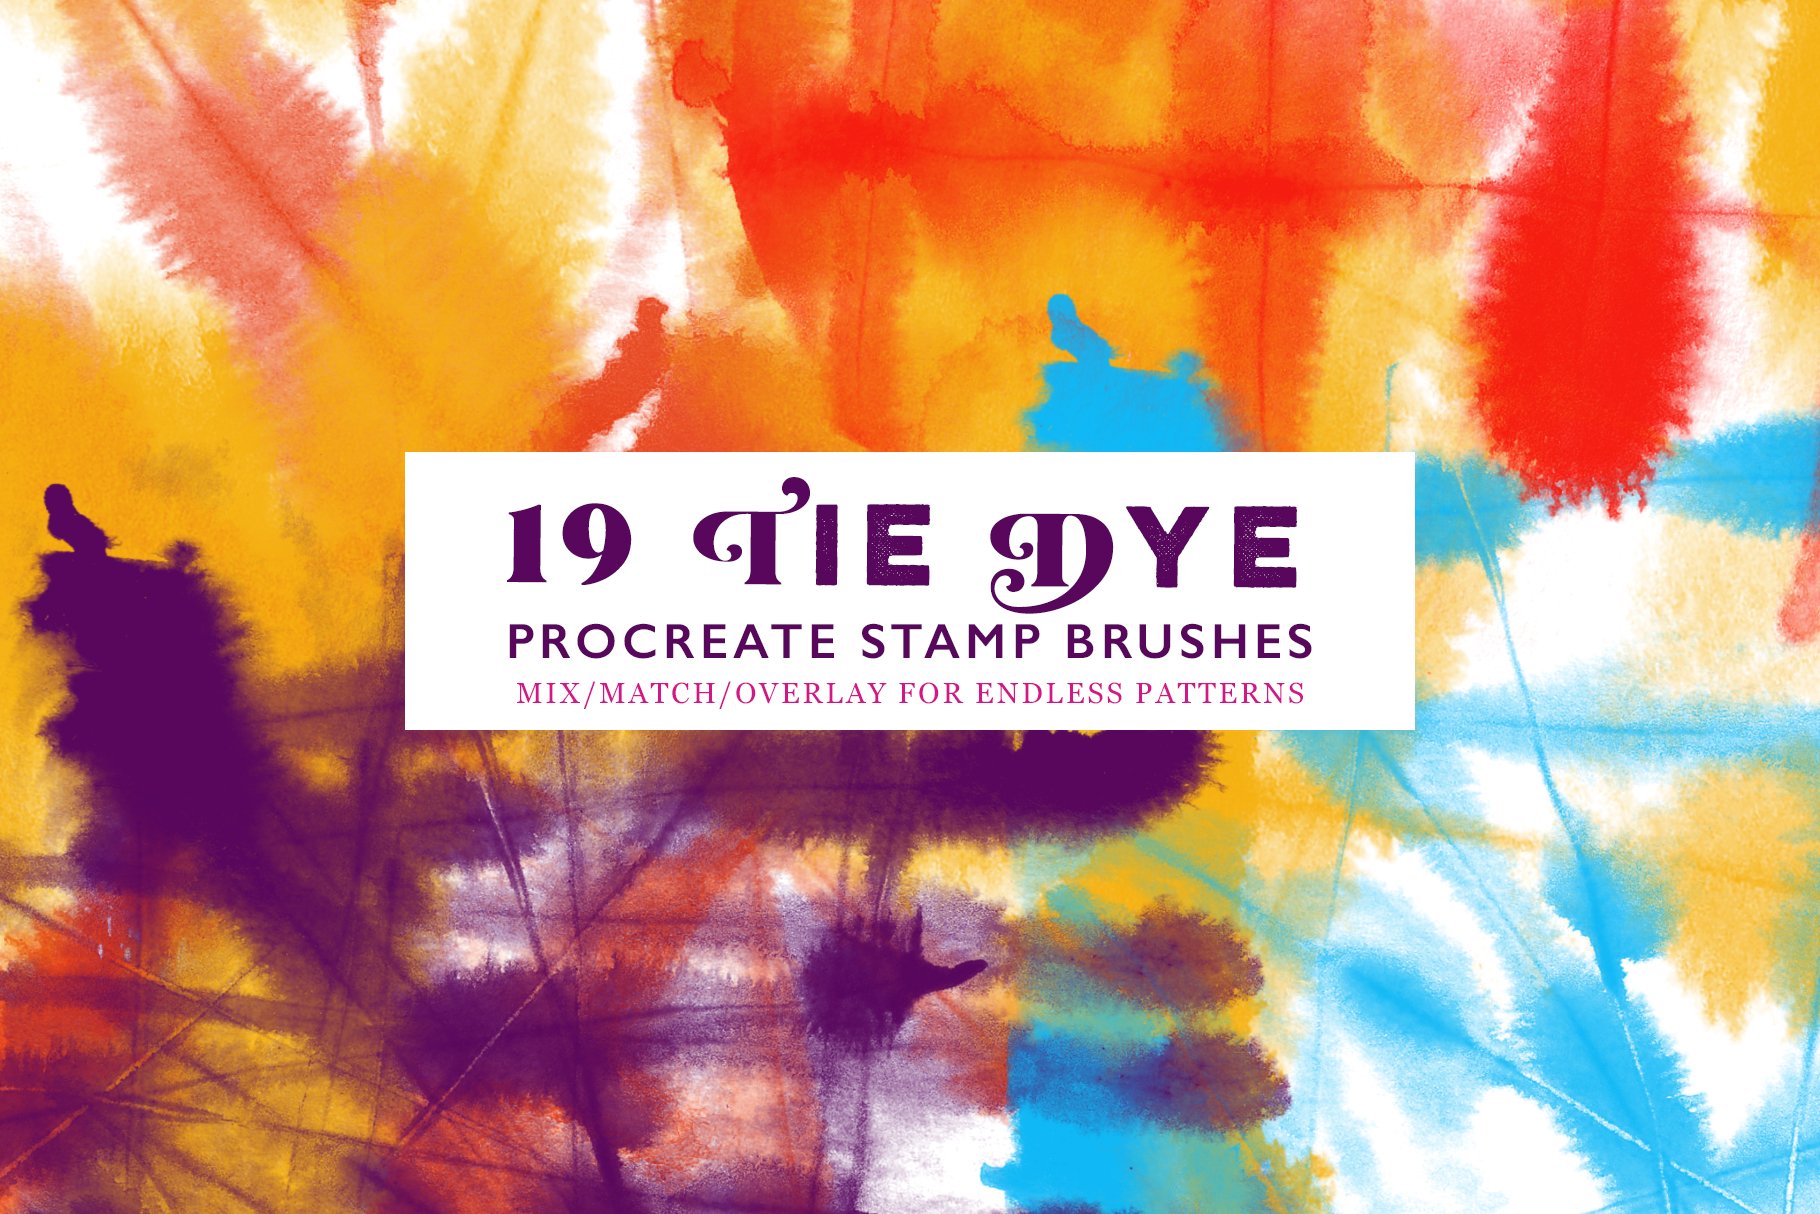 Procreate Tie Dye Stamp Brushes cover image.